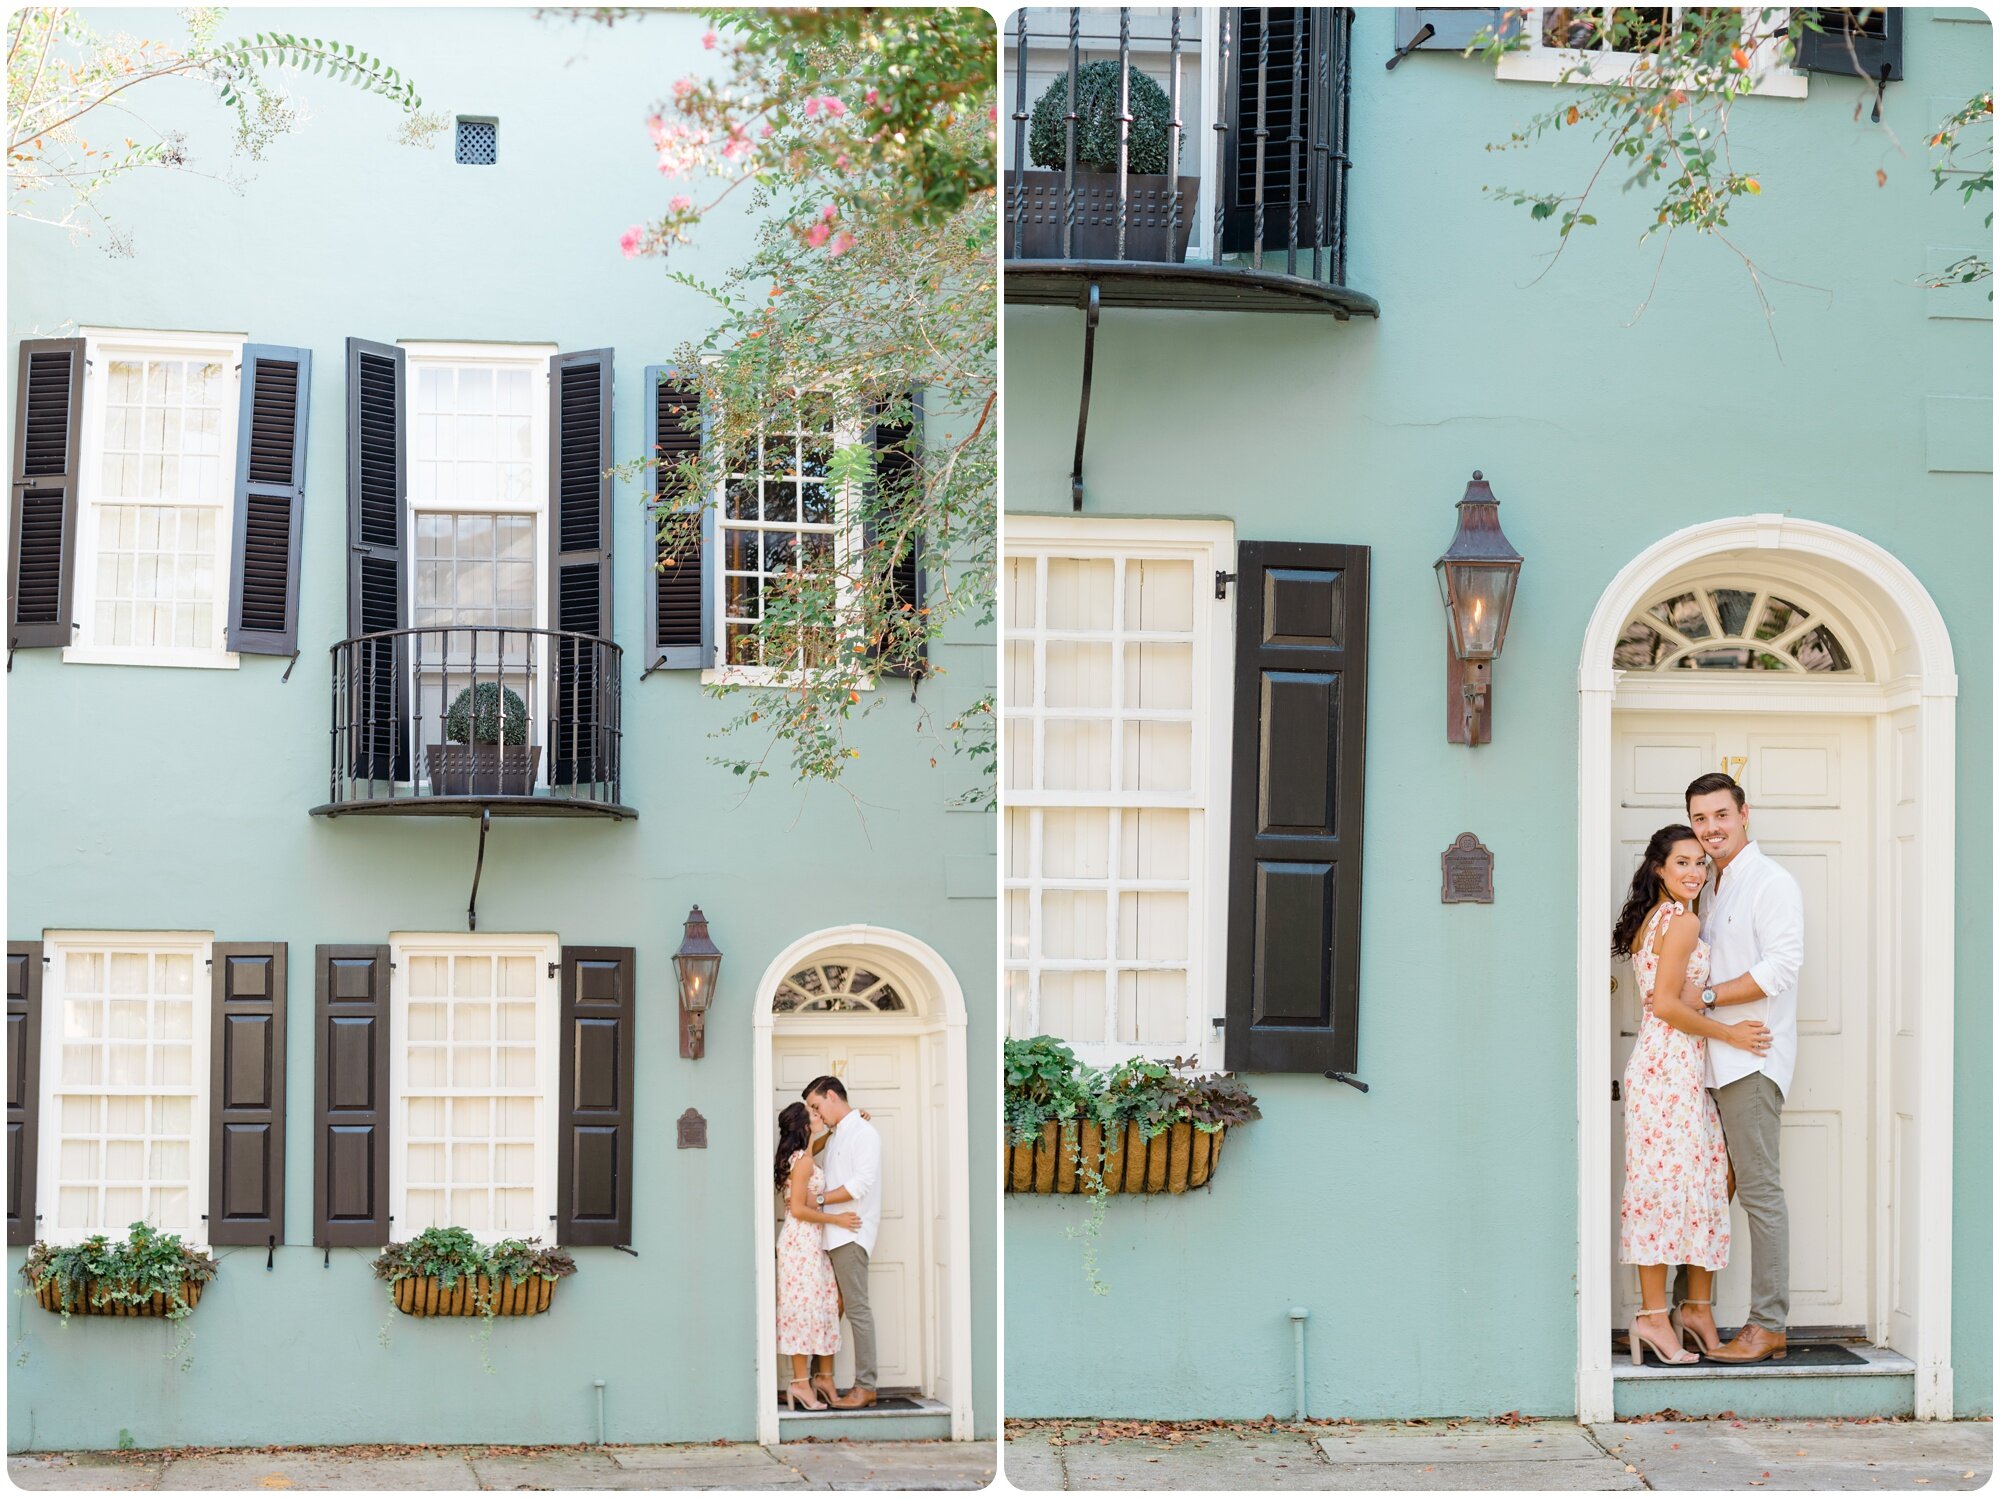 outdoor_engagement_session_candid_natural_charleston_destination_wedding_rainbow_row_colorful_kailee_dimeglio_photography_0006.jpg